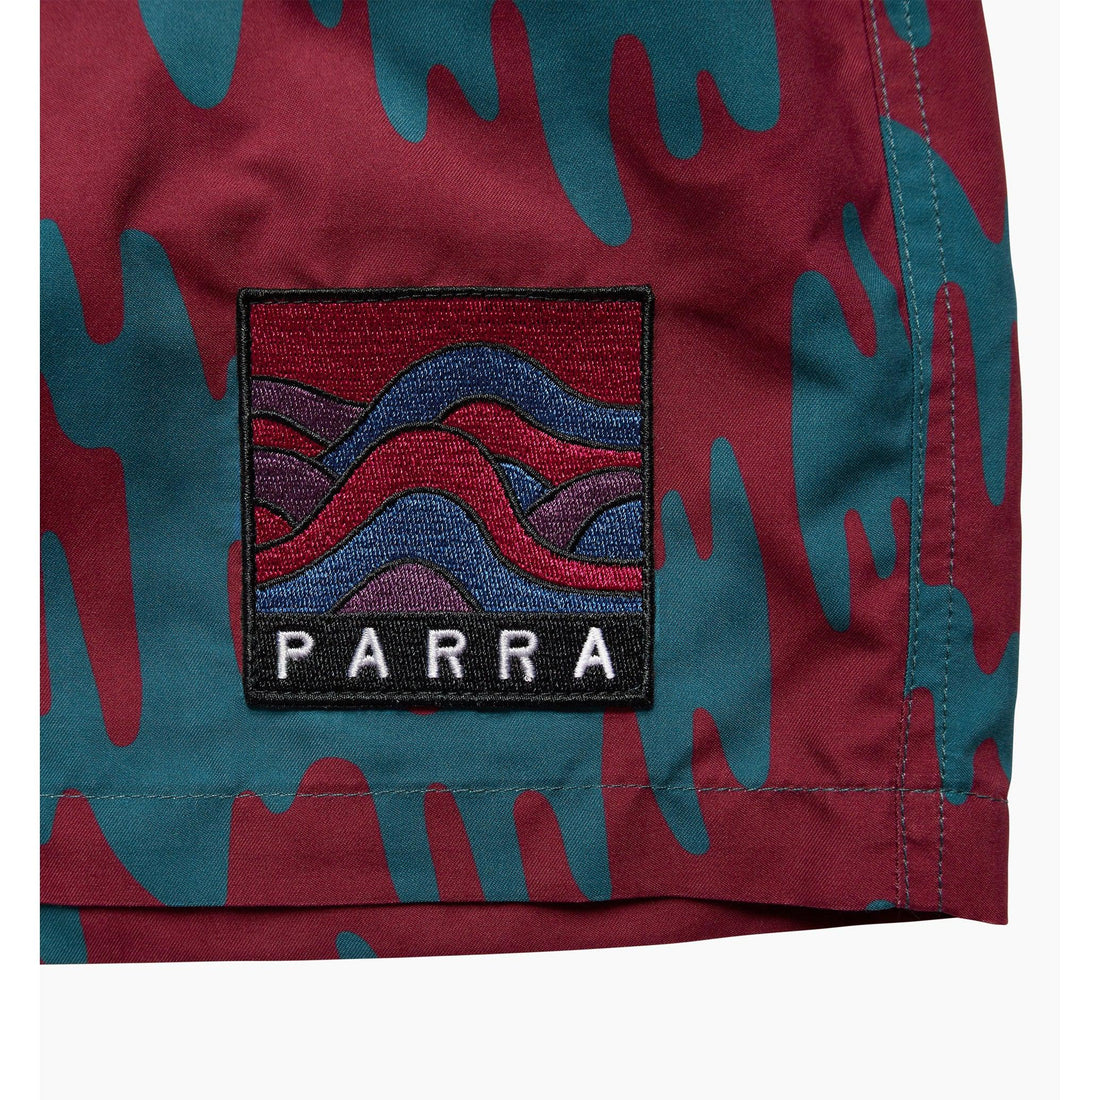 BY PARRA - TREMOR PATTERN SWIM SHORTS - DEEP RED